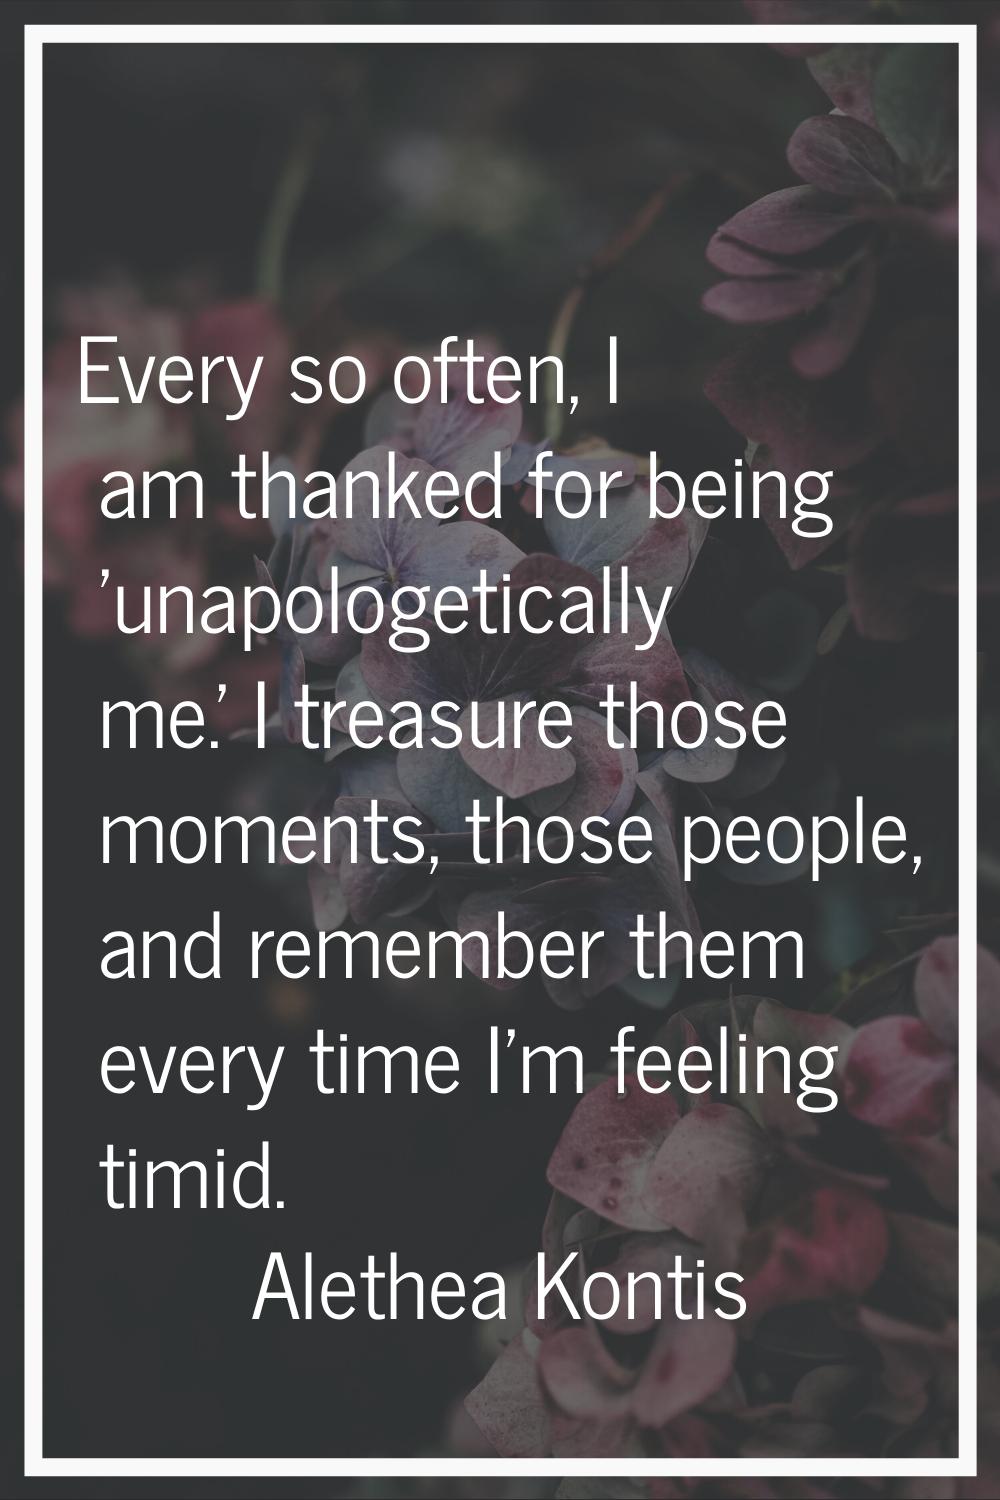 Every so often, I am thanked for being 'unapologetically me.' I treasure those moments, those peopl